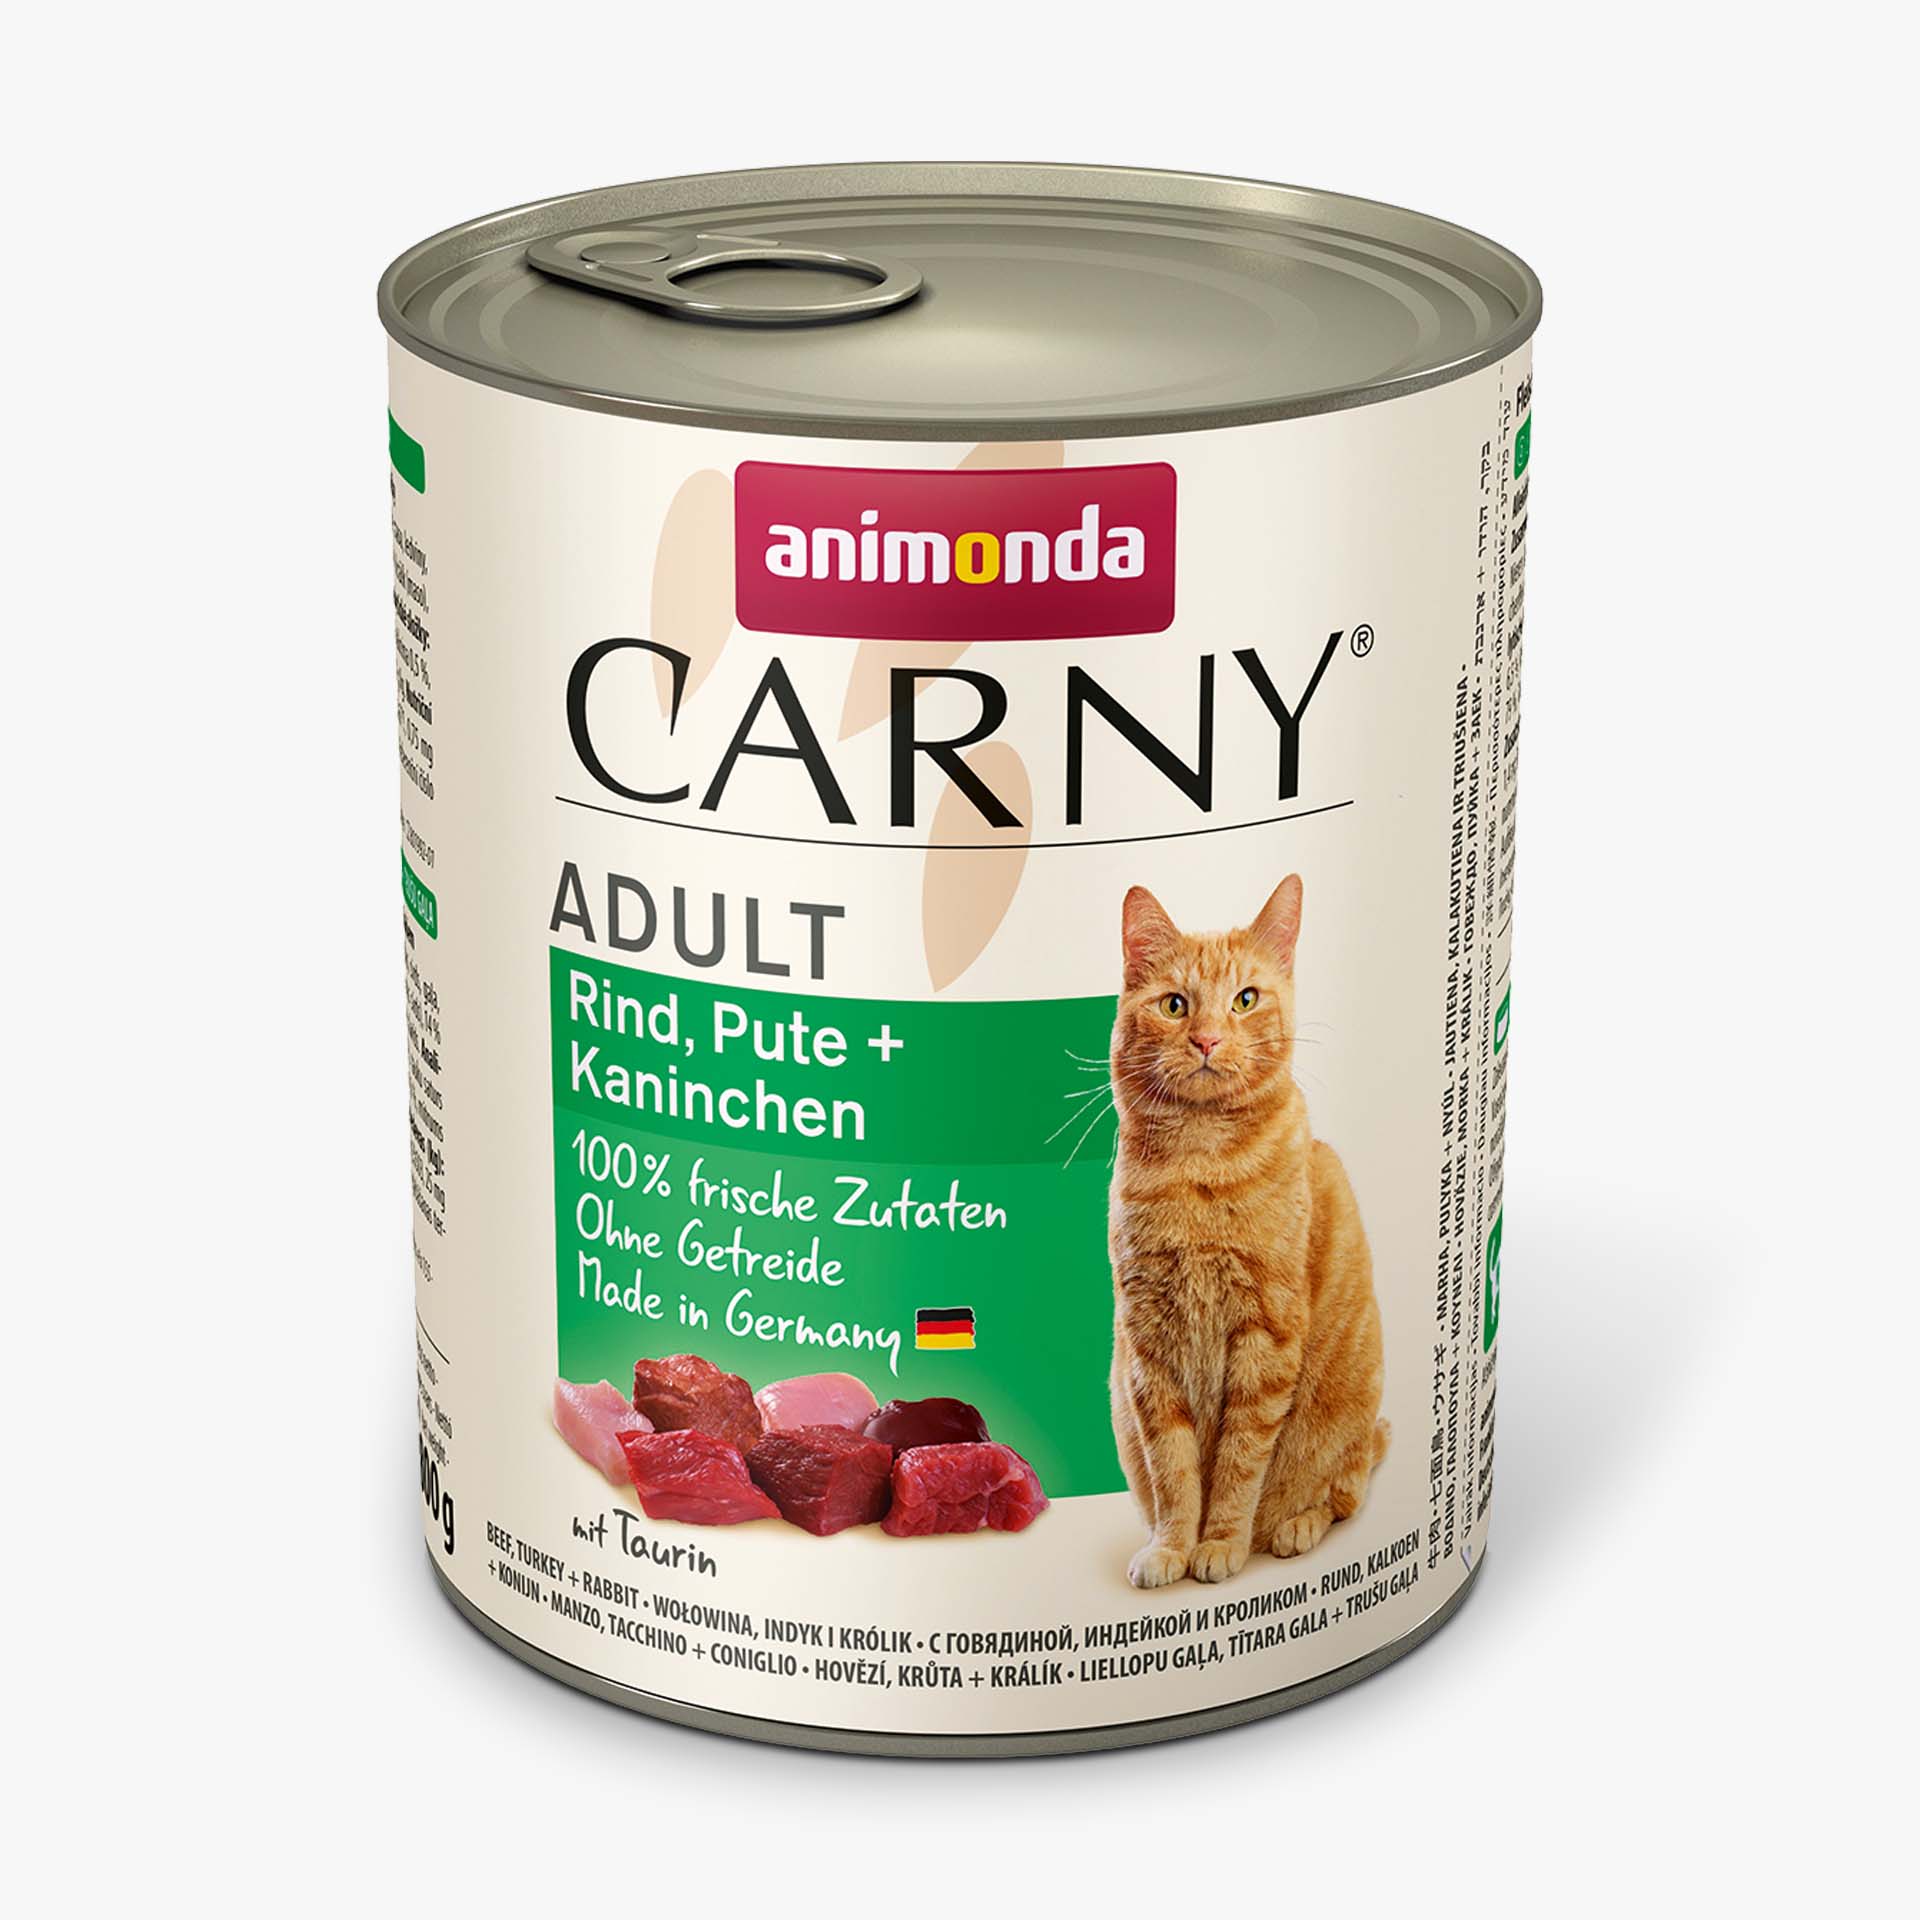 Carny Adult Rind, Pute + Kaninchen